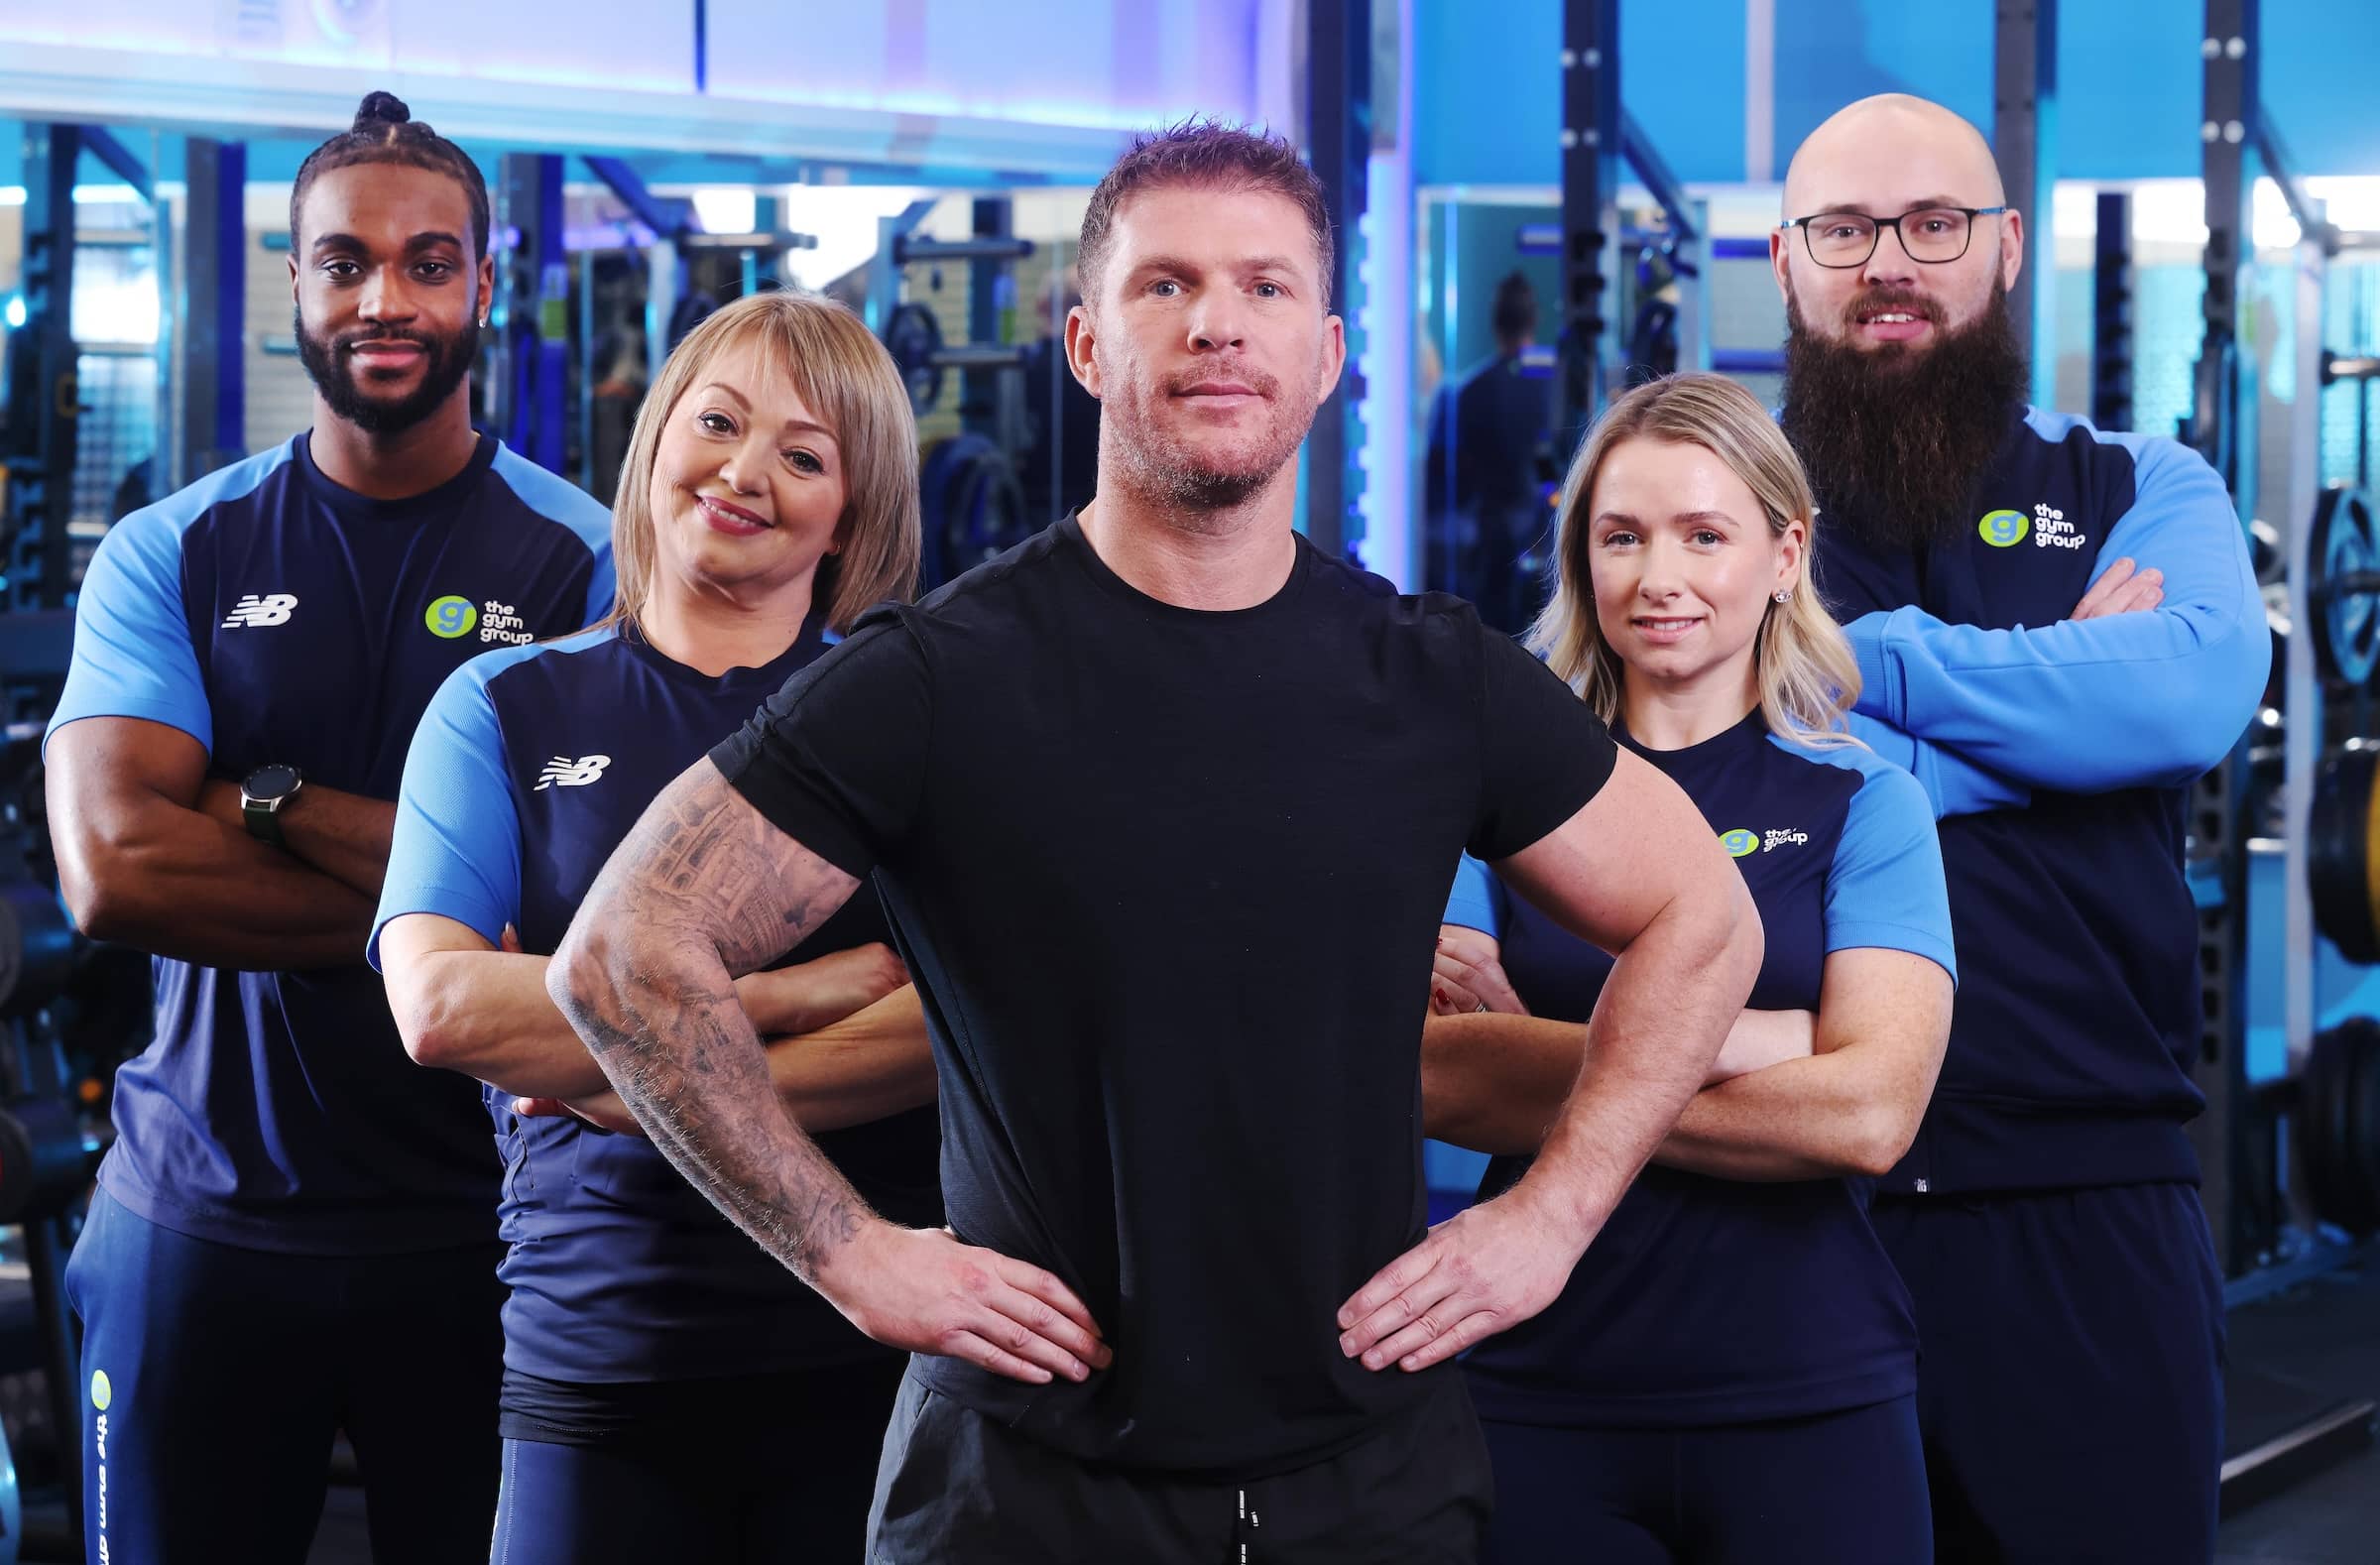 Chris Oliver with Dial-a-PT The Gym Group Personal Trainers